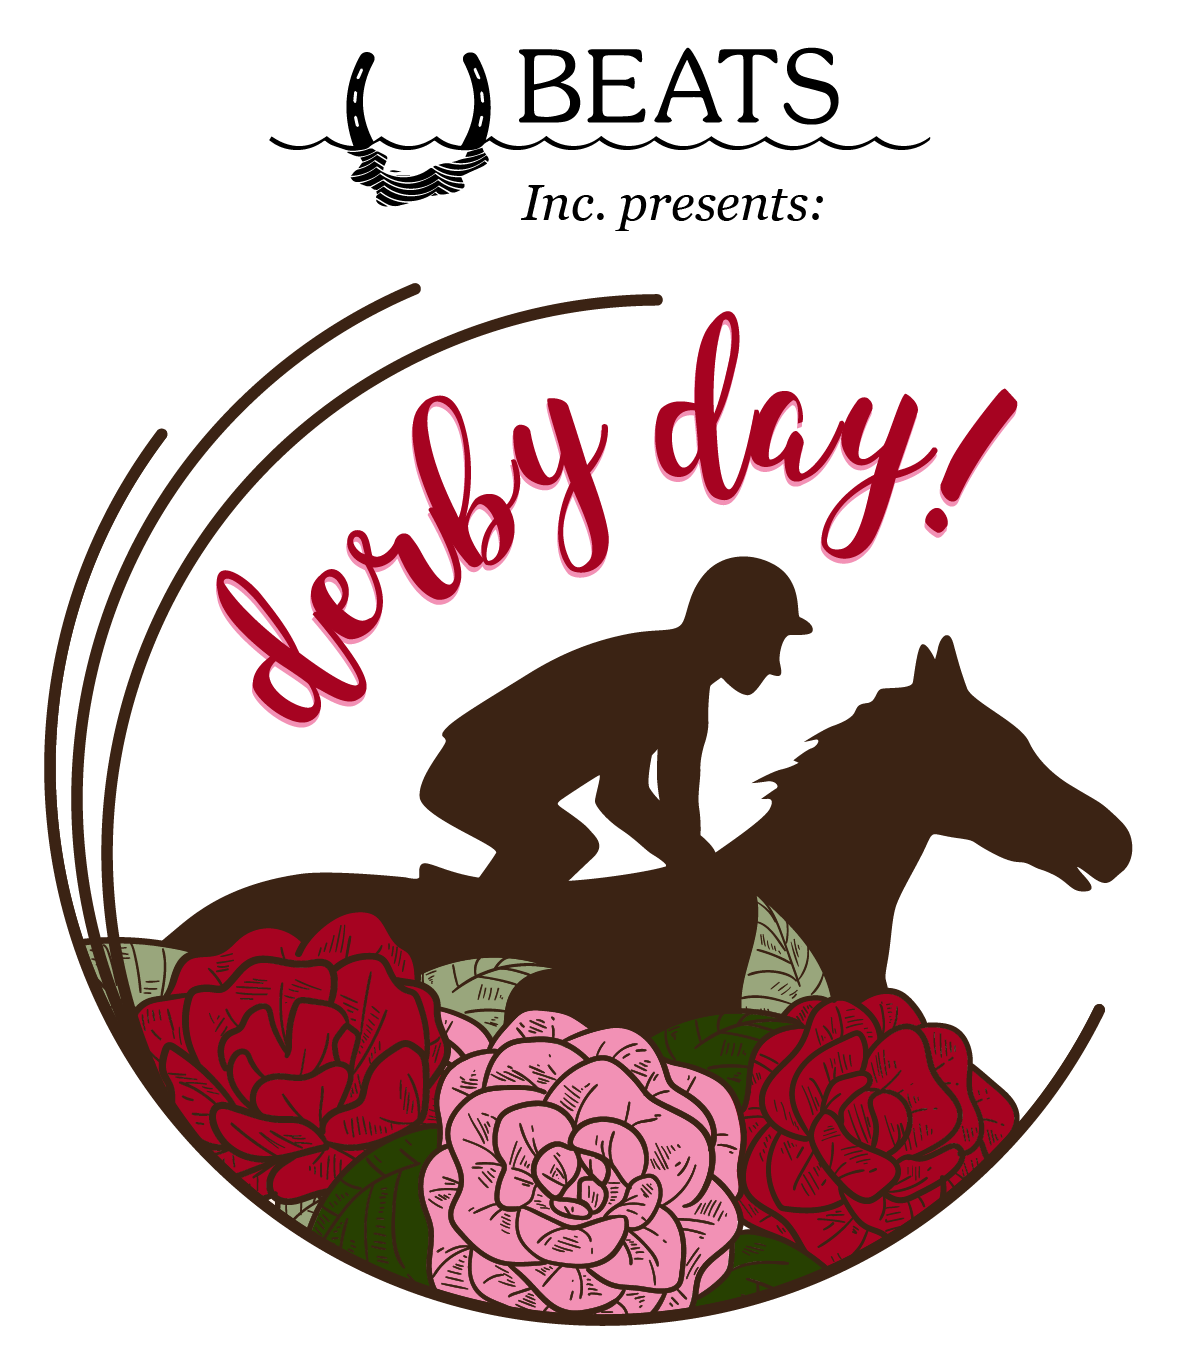 Derby Day horse event coming to Canton in September Lifestyle